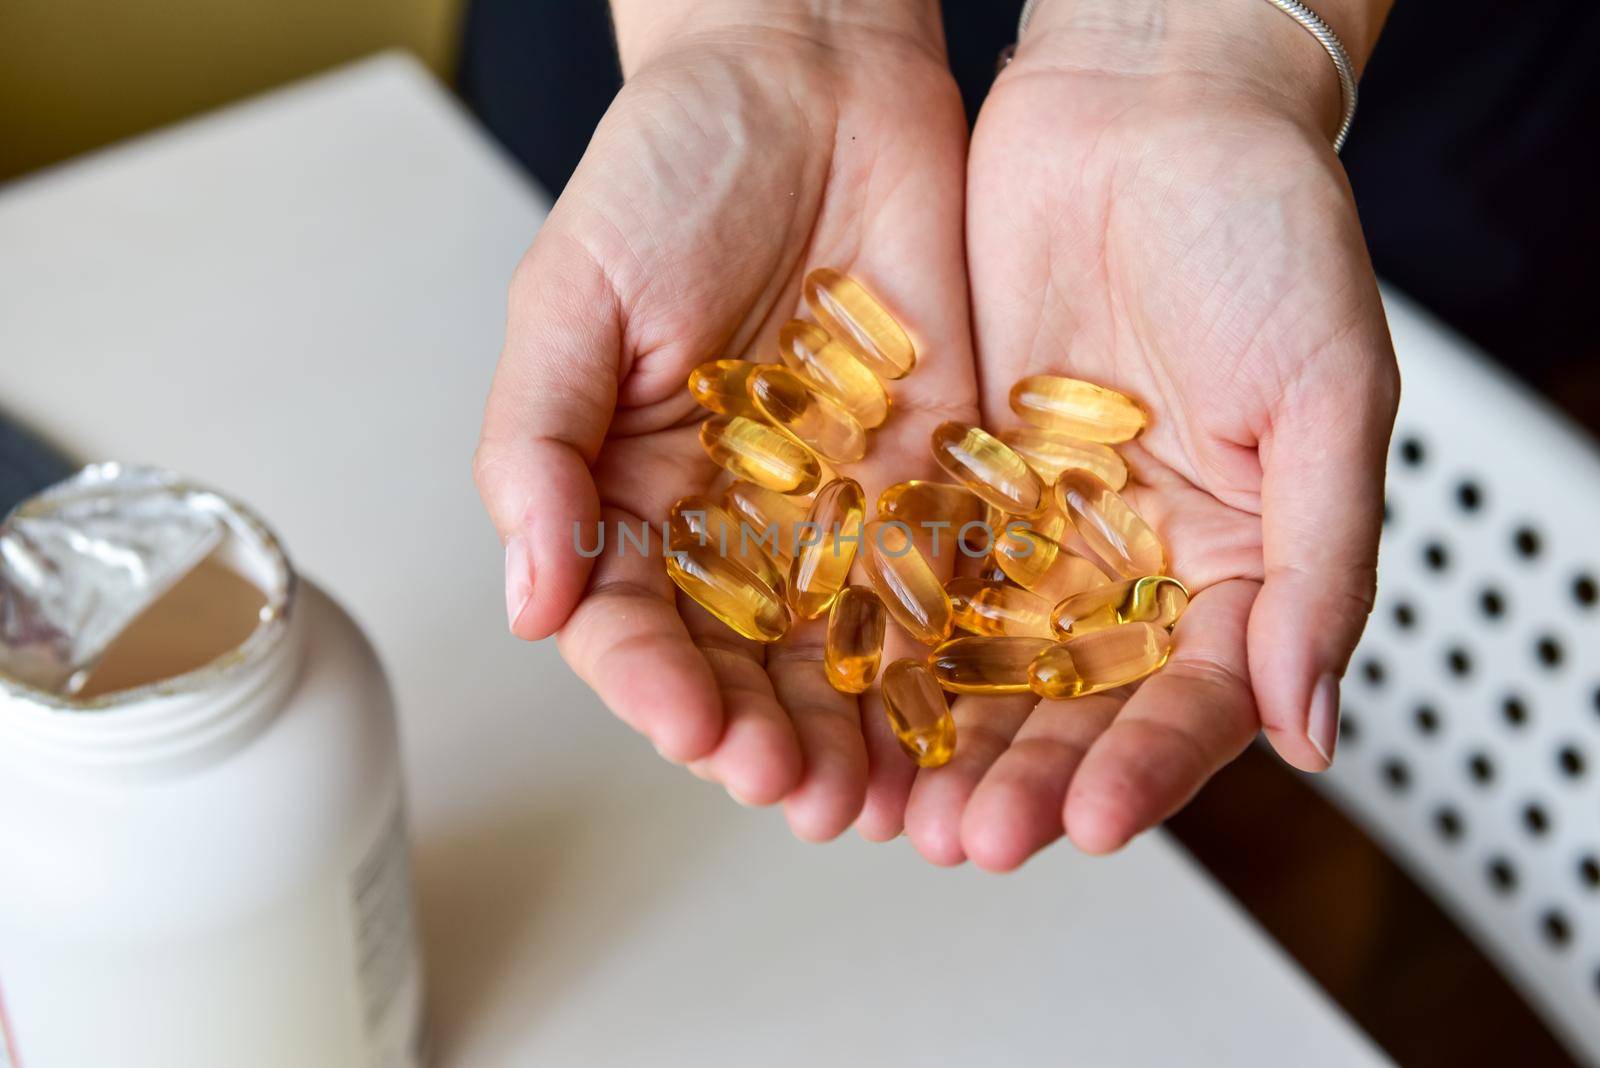 Hands holding fish oil Omega-3 capsules. Medical healthcare, healthy nutrition supplements concept. Vitamin tablets.